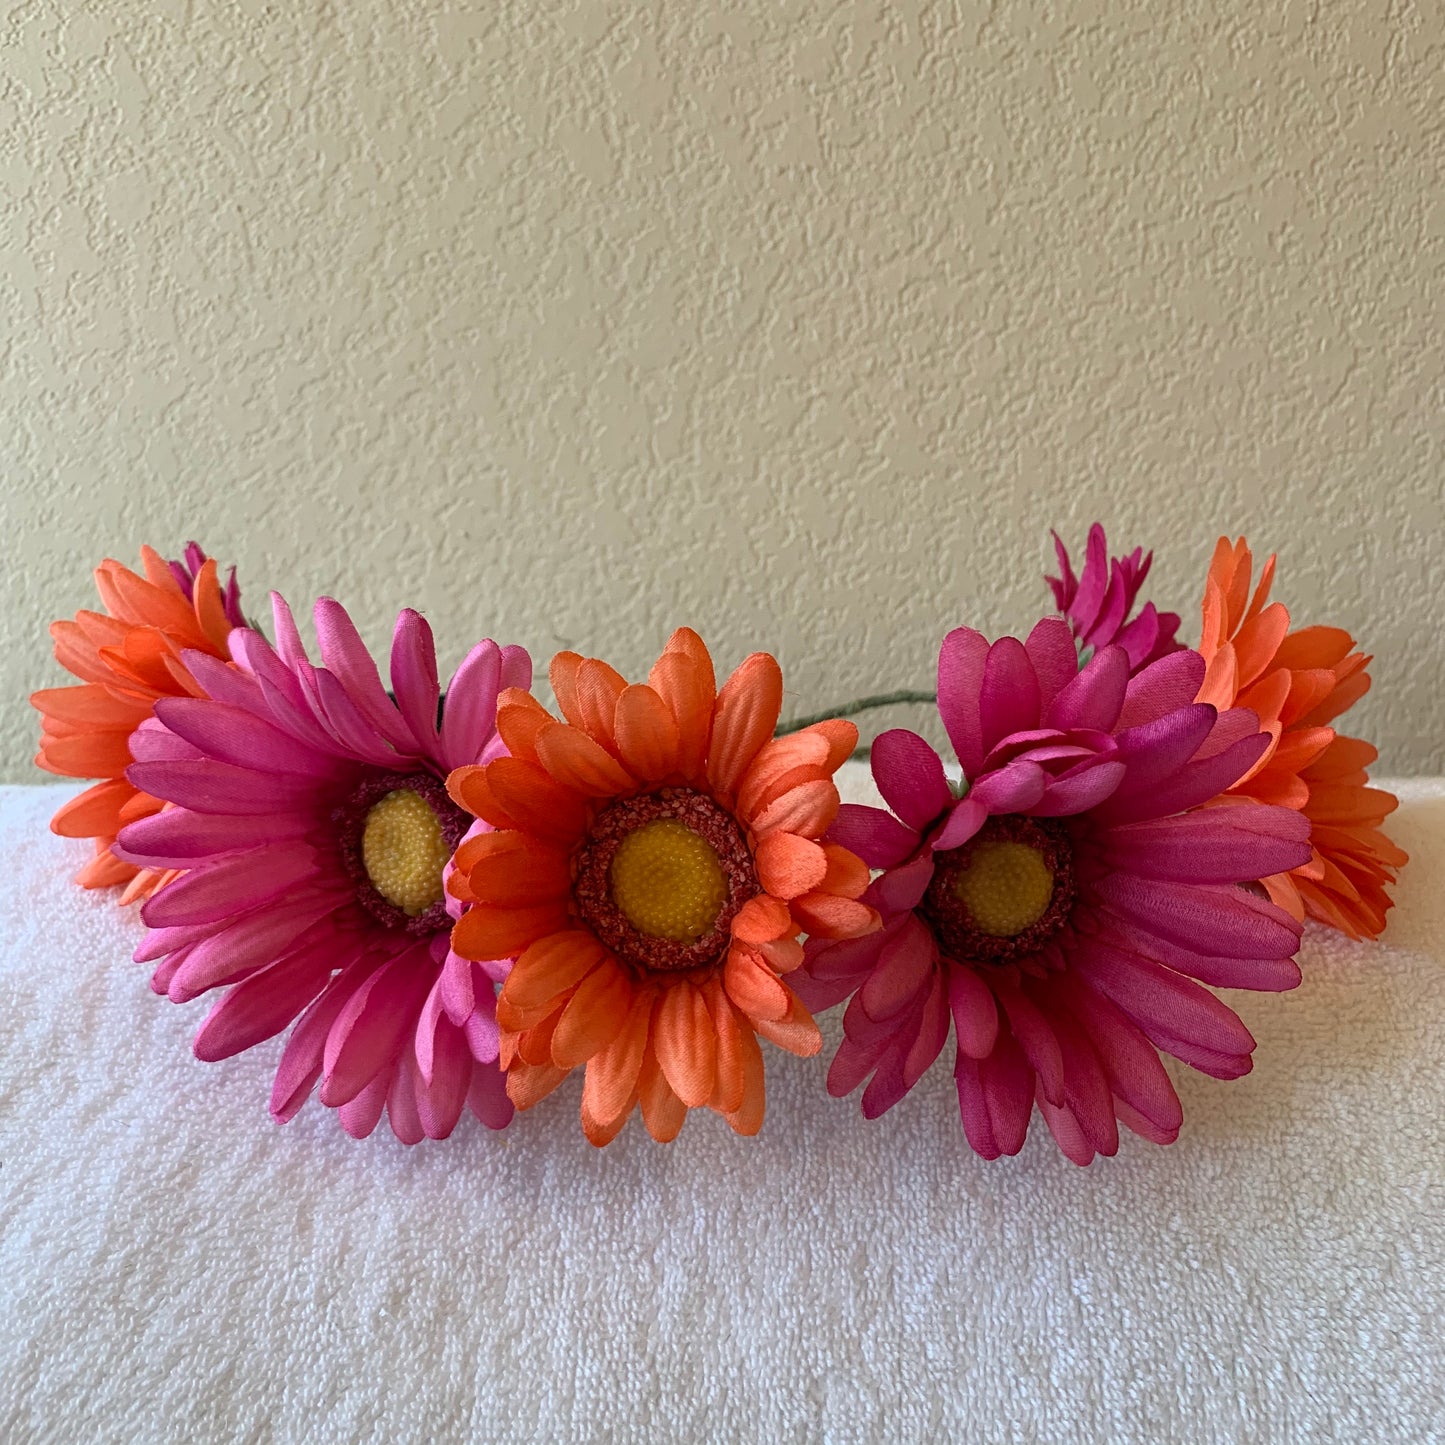 Large Wreath Lighted - Hot Pink and Orange Daisies